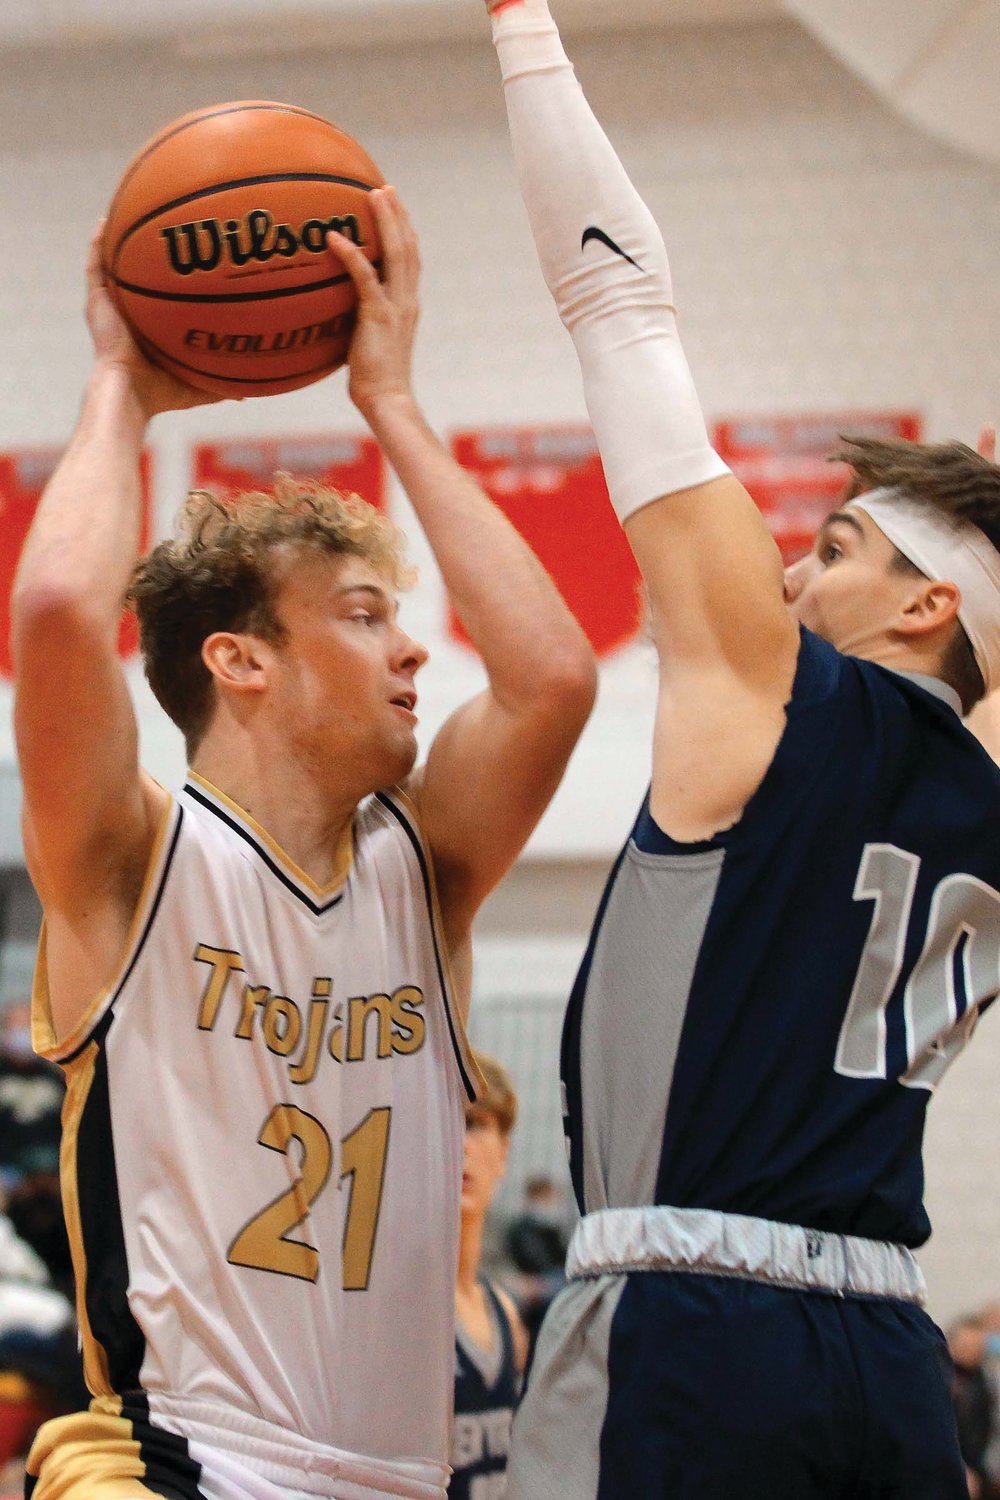 Logan Pinkerton of Covington looks to pass against the defense of Brenner Oliver of Lafayette Central Catholic...Lafayette Central Catholic defeated Covington by the score of 67-49.